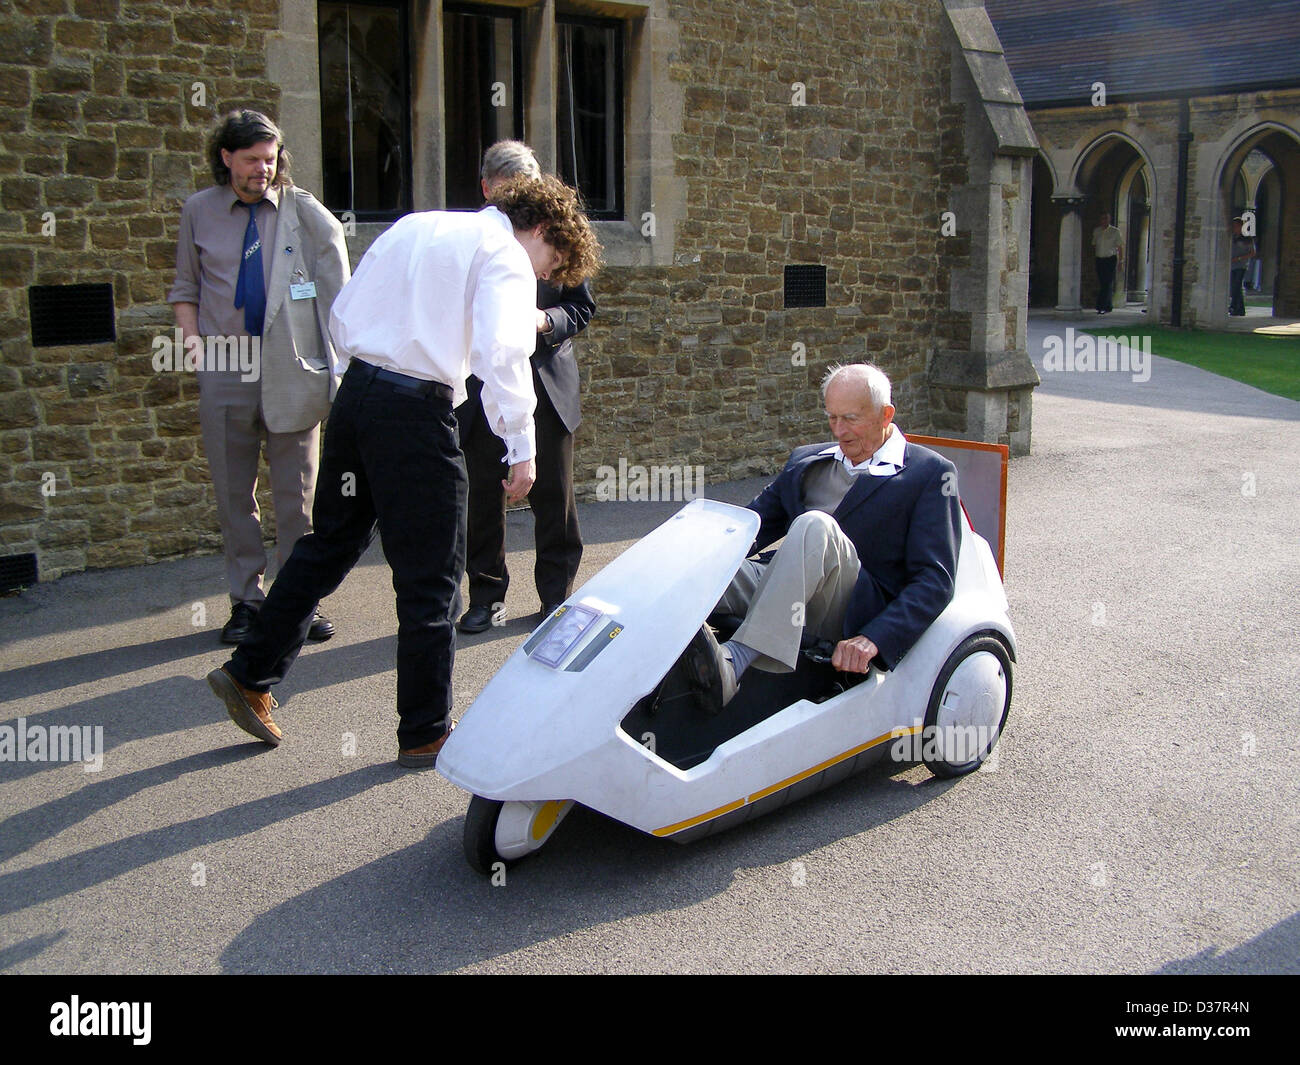 File Picture; Reg Turnill (1915-2013), aerospace correspondent for over 65 years,  pilots  a rocket-powered Sinclair C5 electric tricycle, at the British Rocketry Oral History Project conference in 2007, Charterhouse School, Surrey, England. UK. Mr Turnill passed away peacefully in the early hours of this morning, 12th Feb 2013, at the Pilgrim's Hospice in Ashford, where he had been for the past month. Also present: Jon London, Duncan Lunan Stock Photo